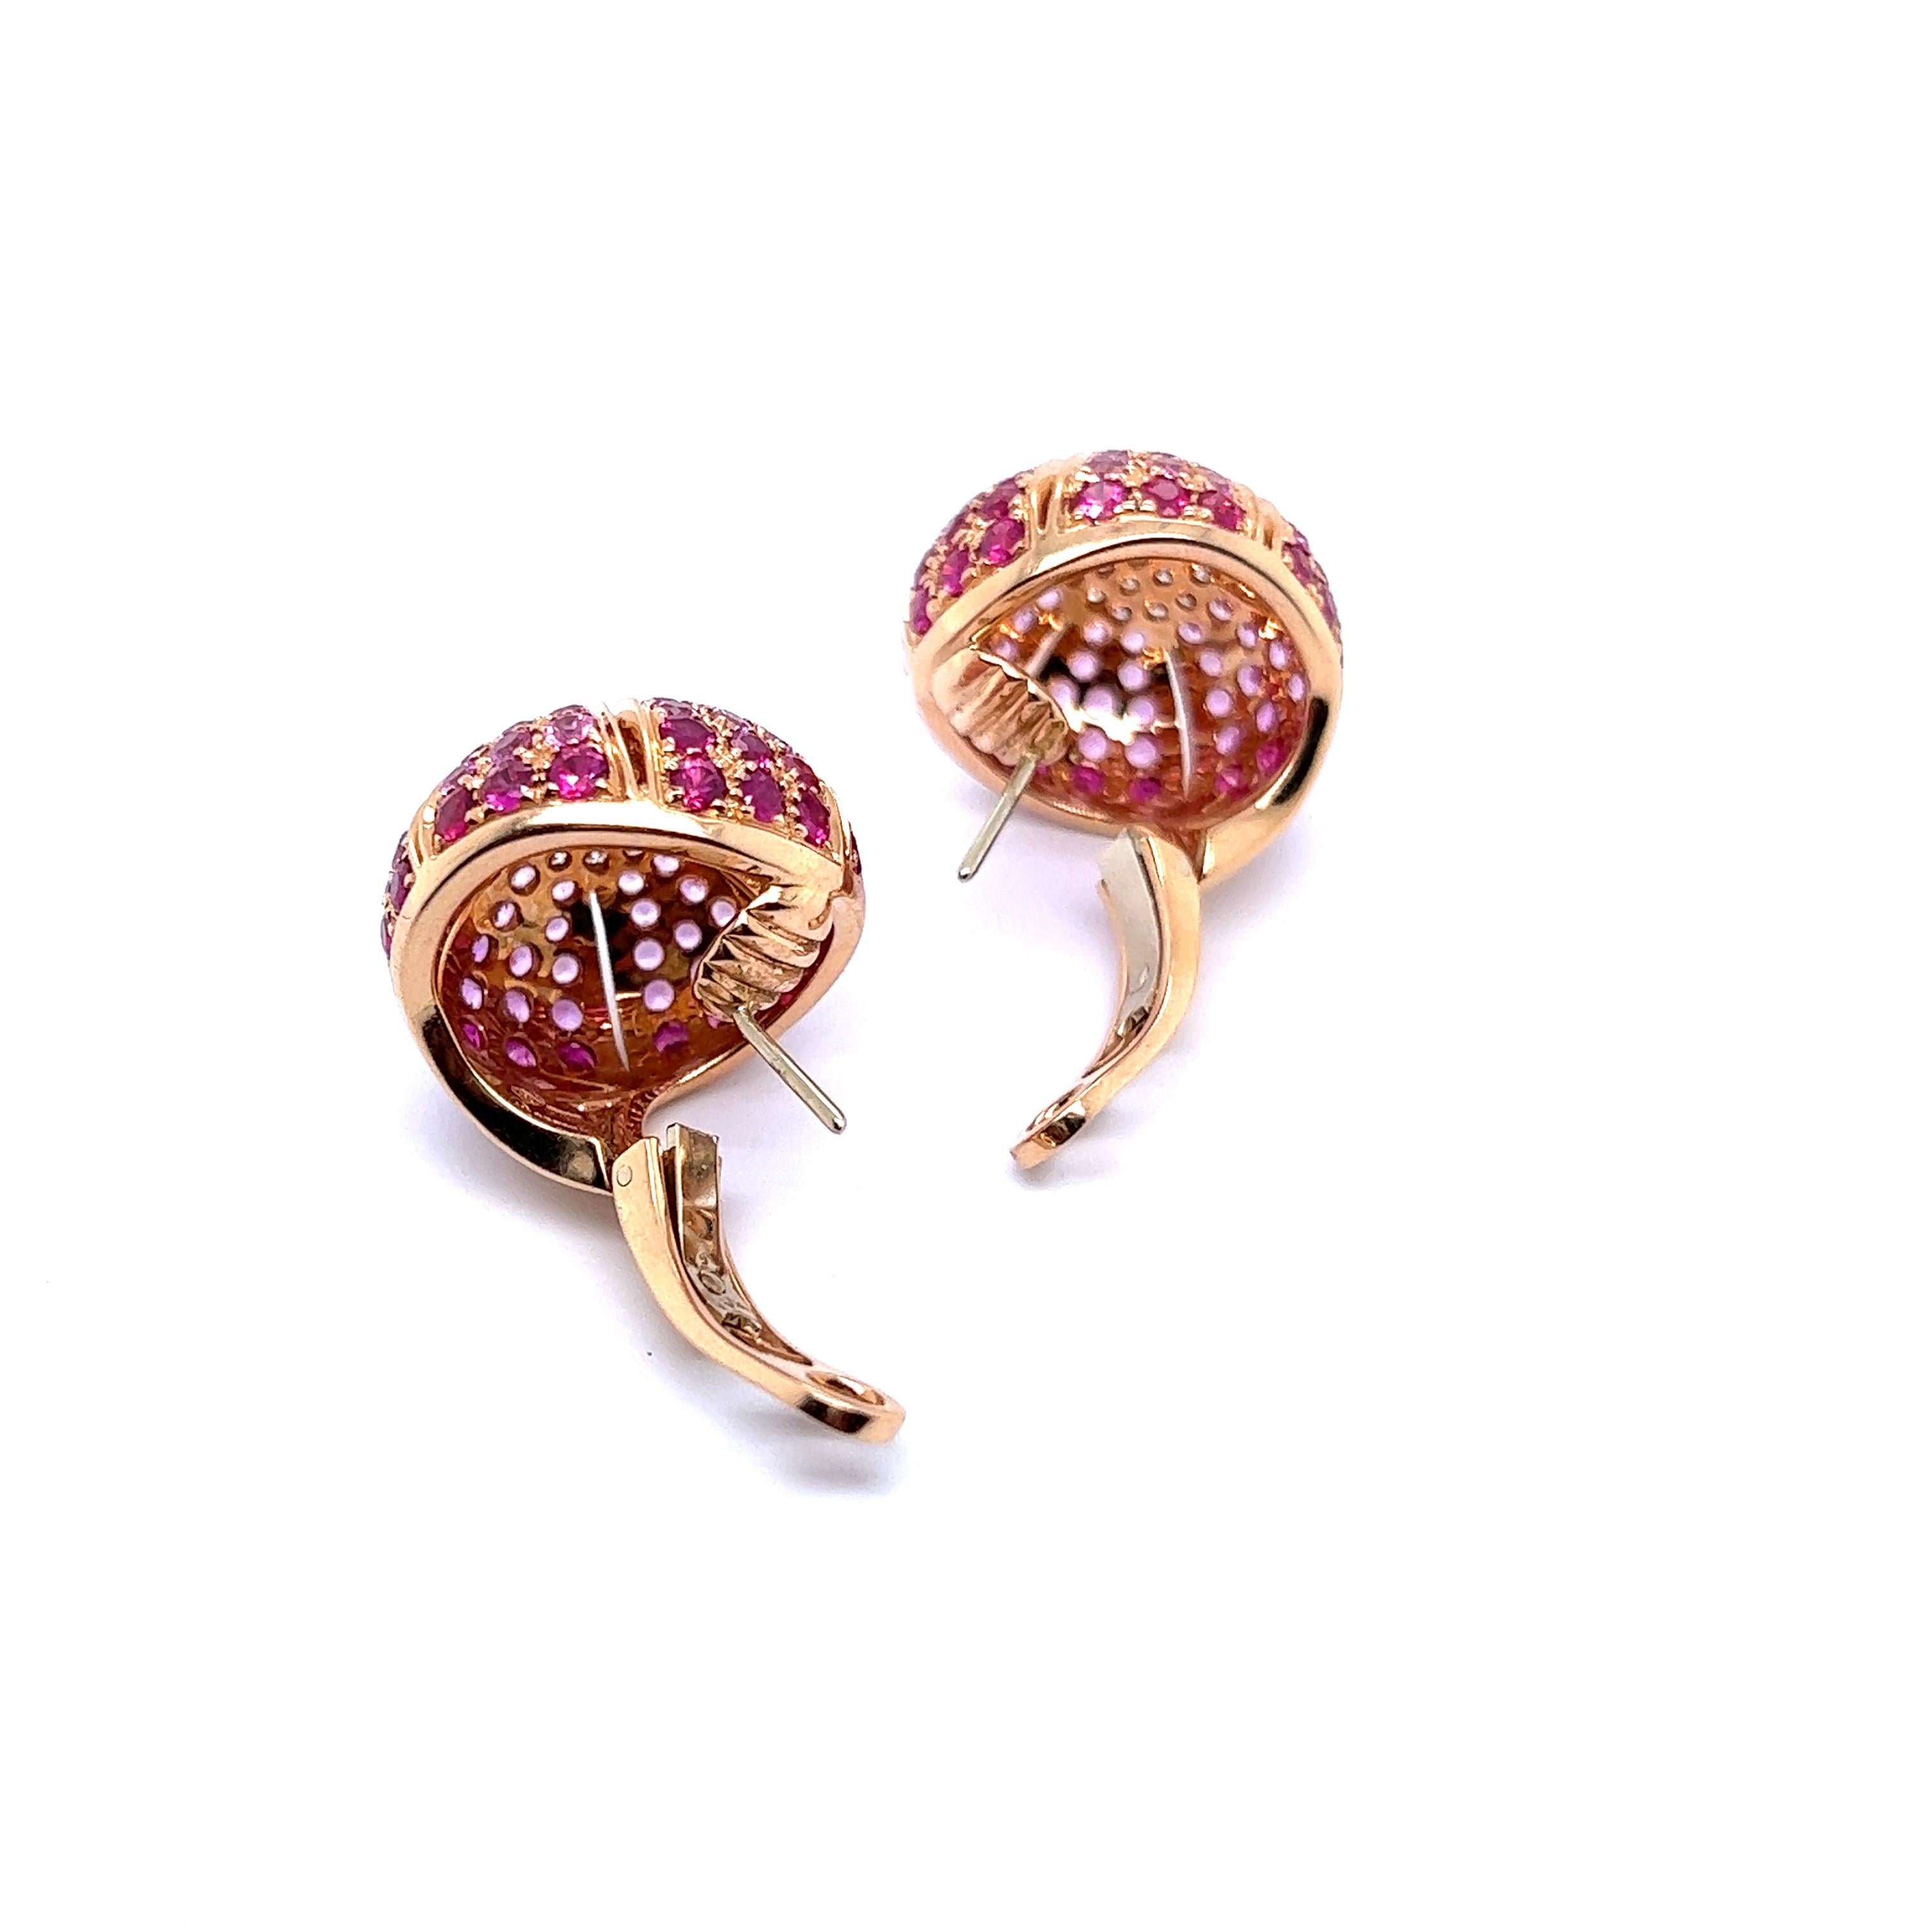 Earrings with Pink Sapphires & Diamonds in 18 Karat Rose Gold by Damiani 6